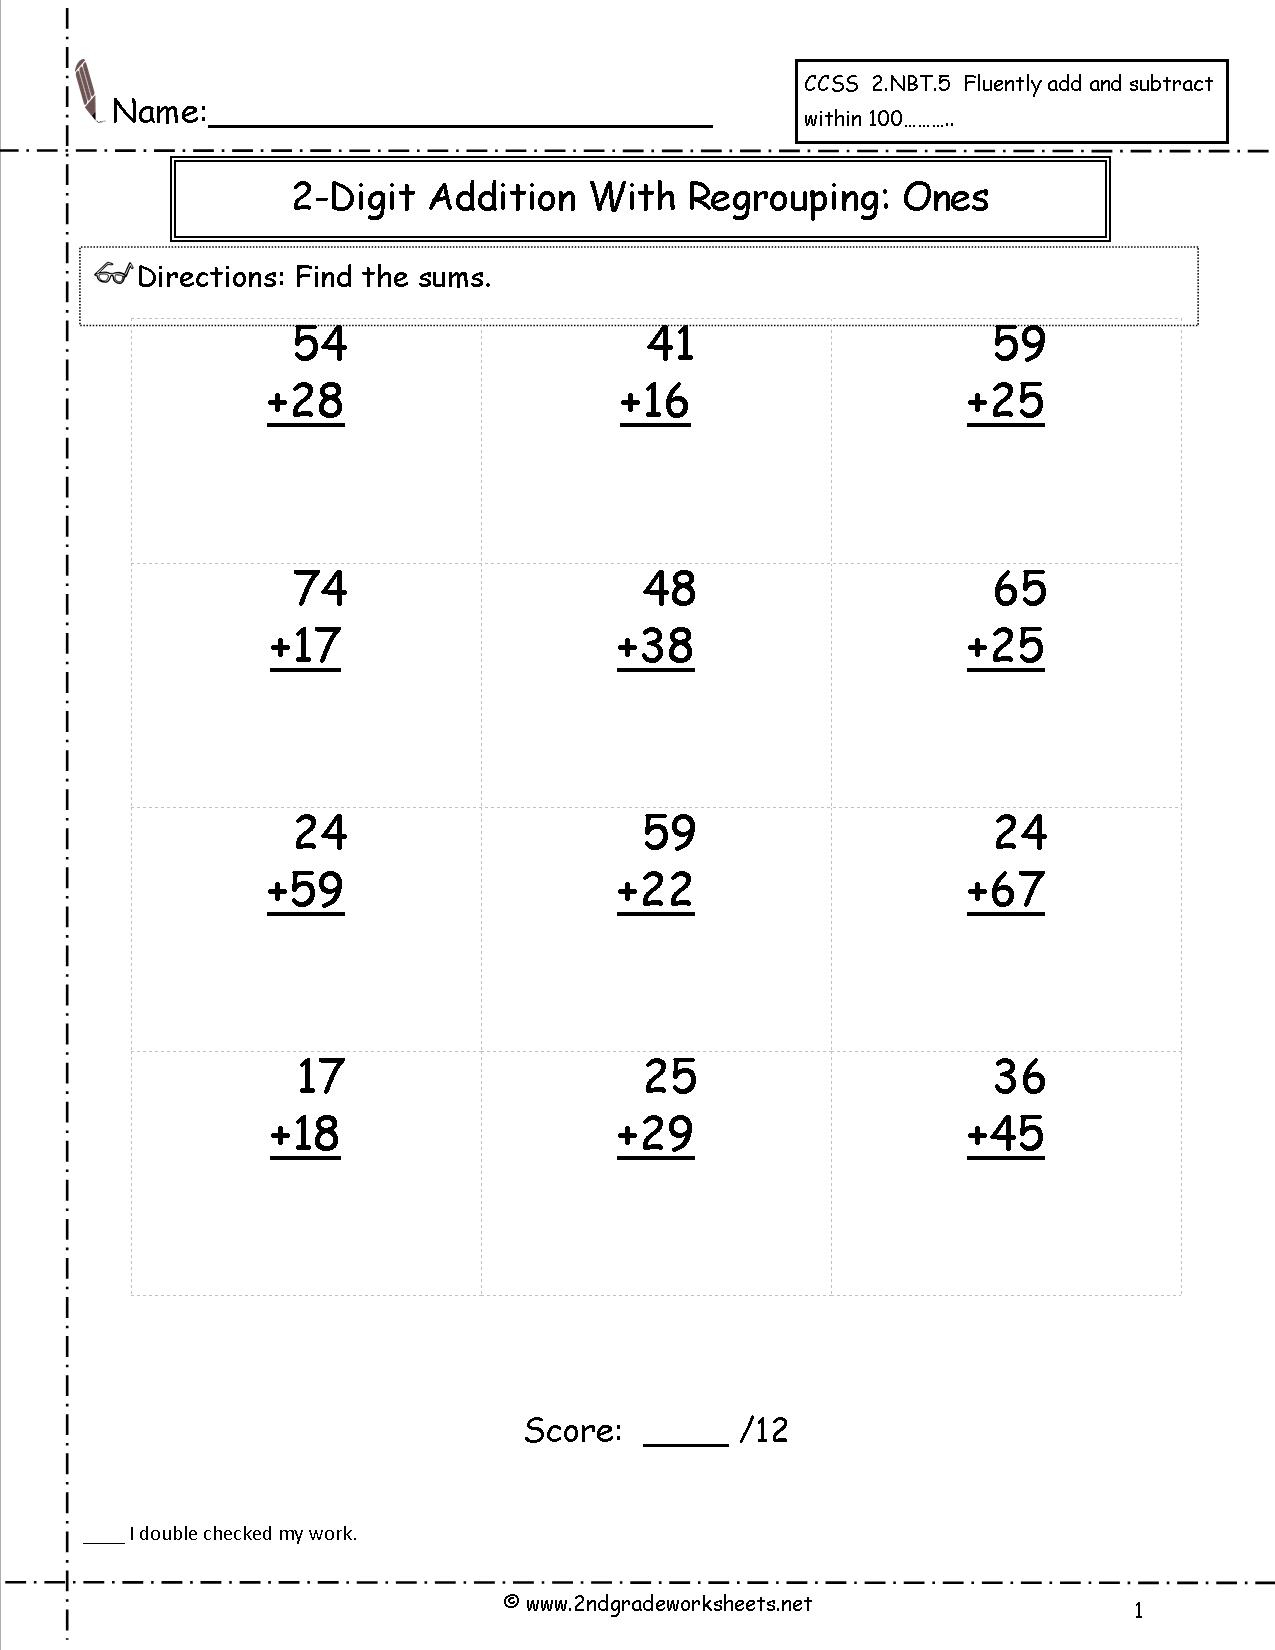 Large Print 2 Digit Plus 2 Digit Addition With No Regrouping A Printable 2 Digit Addition